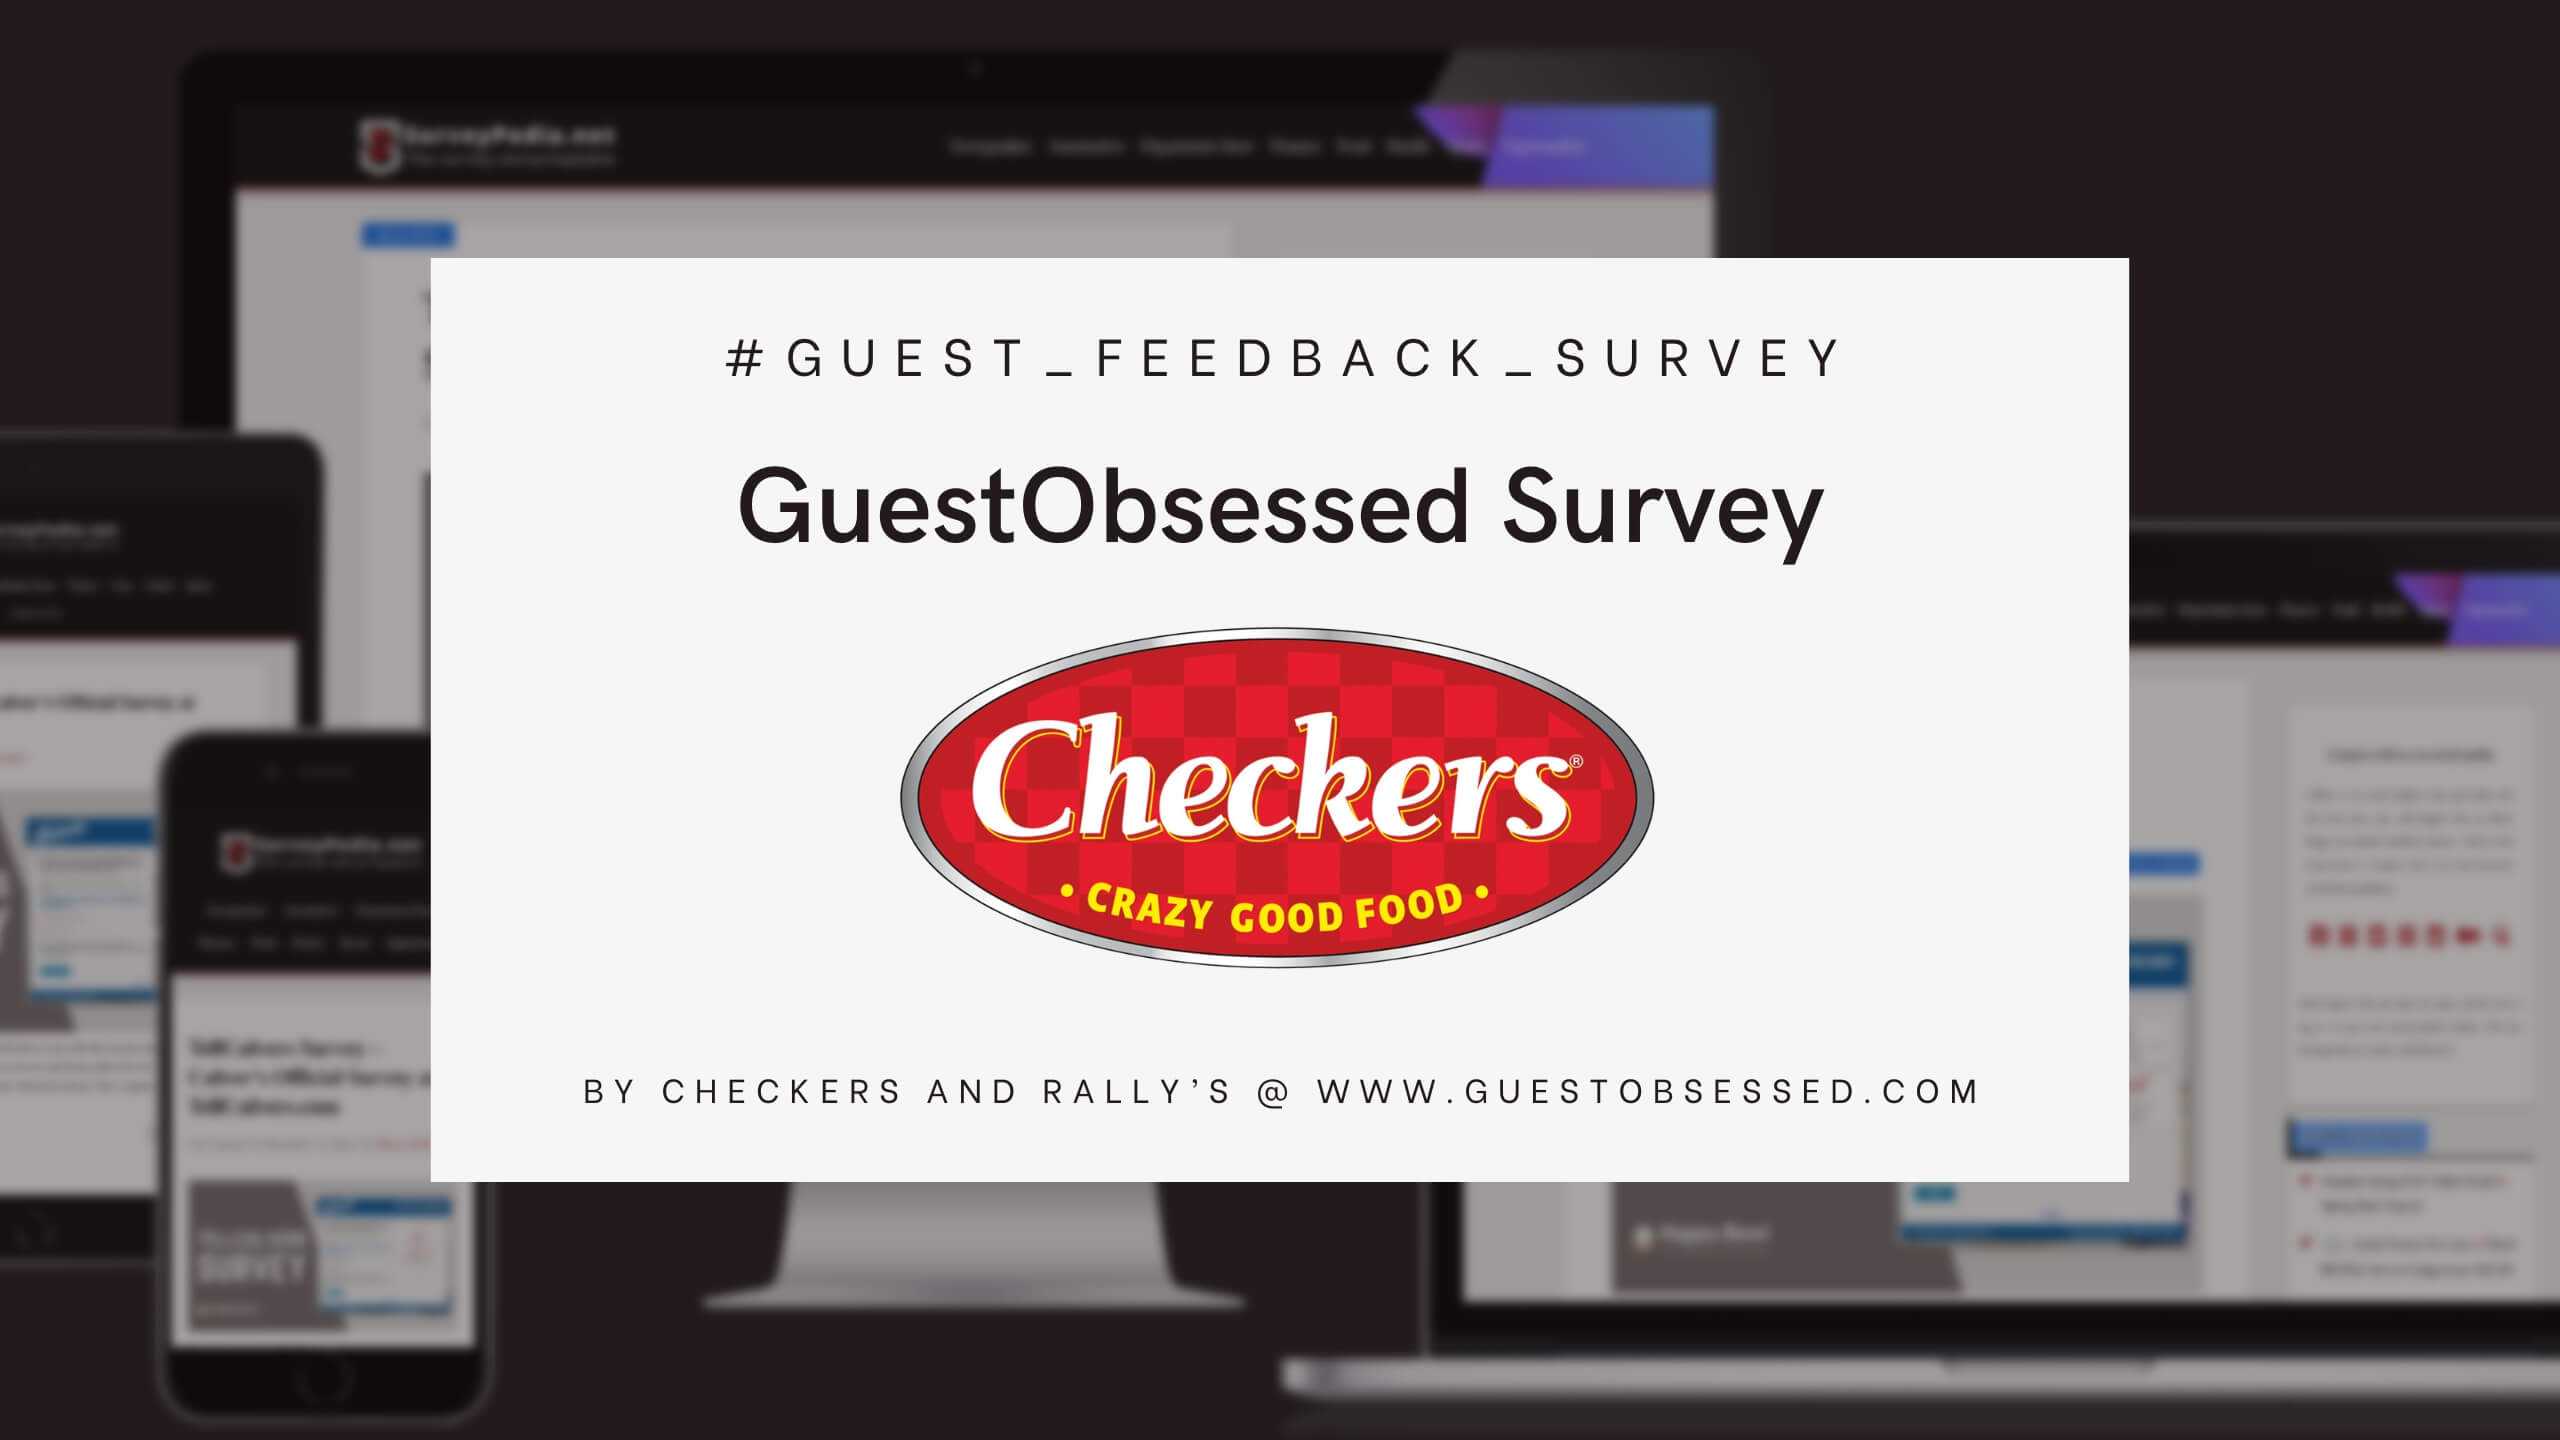 GuestObsessed Survey Survey: Checkers and Rally’s Official Customer Feedback Survey at www.guestobsessed.com